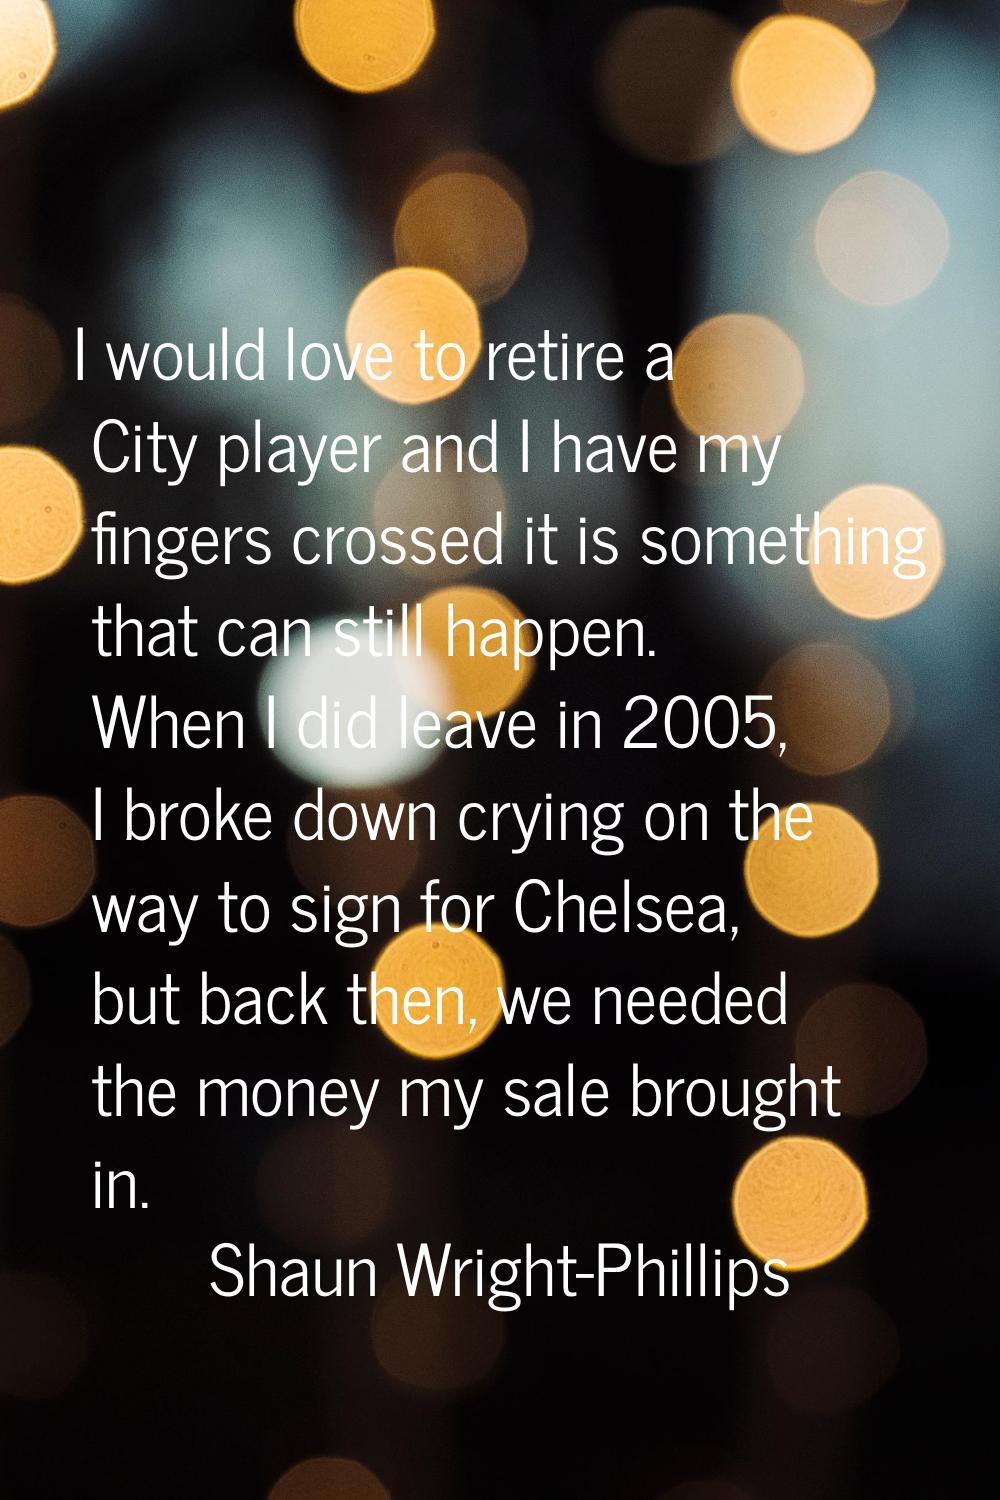 I would love to retire a City player and I have my fingers crossed it is something that can still h